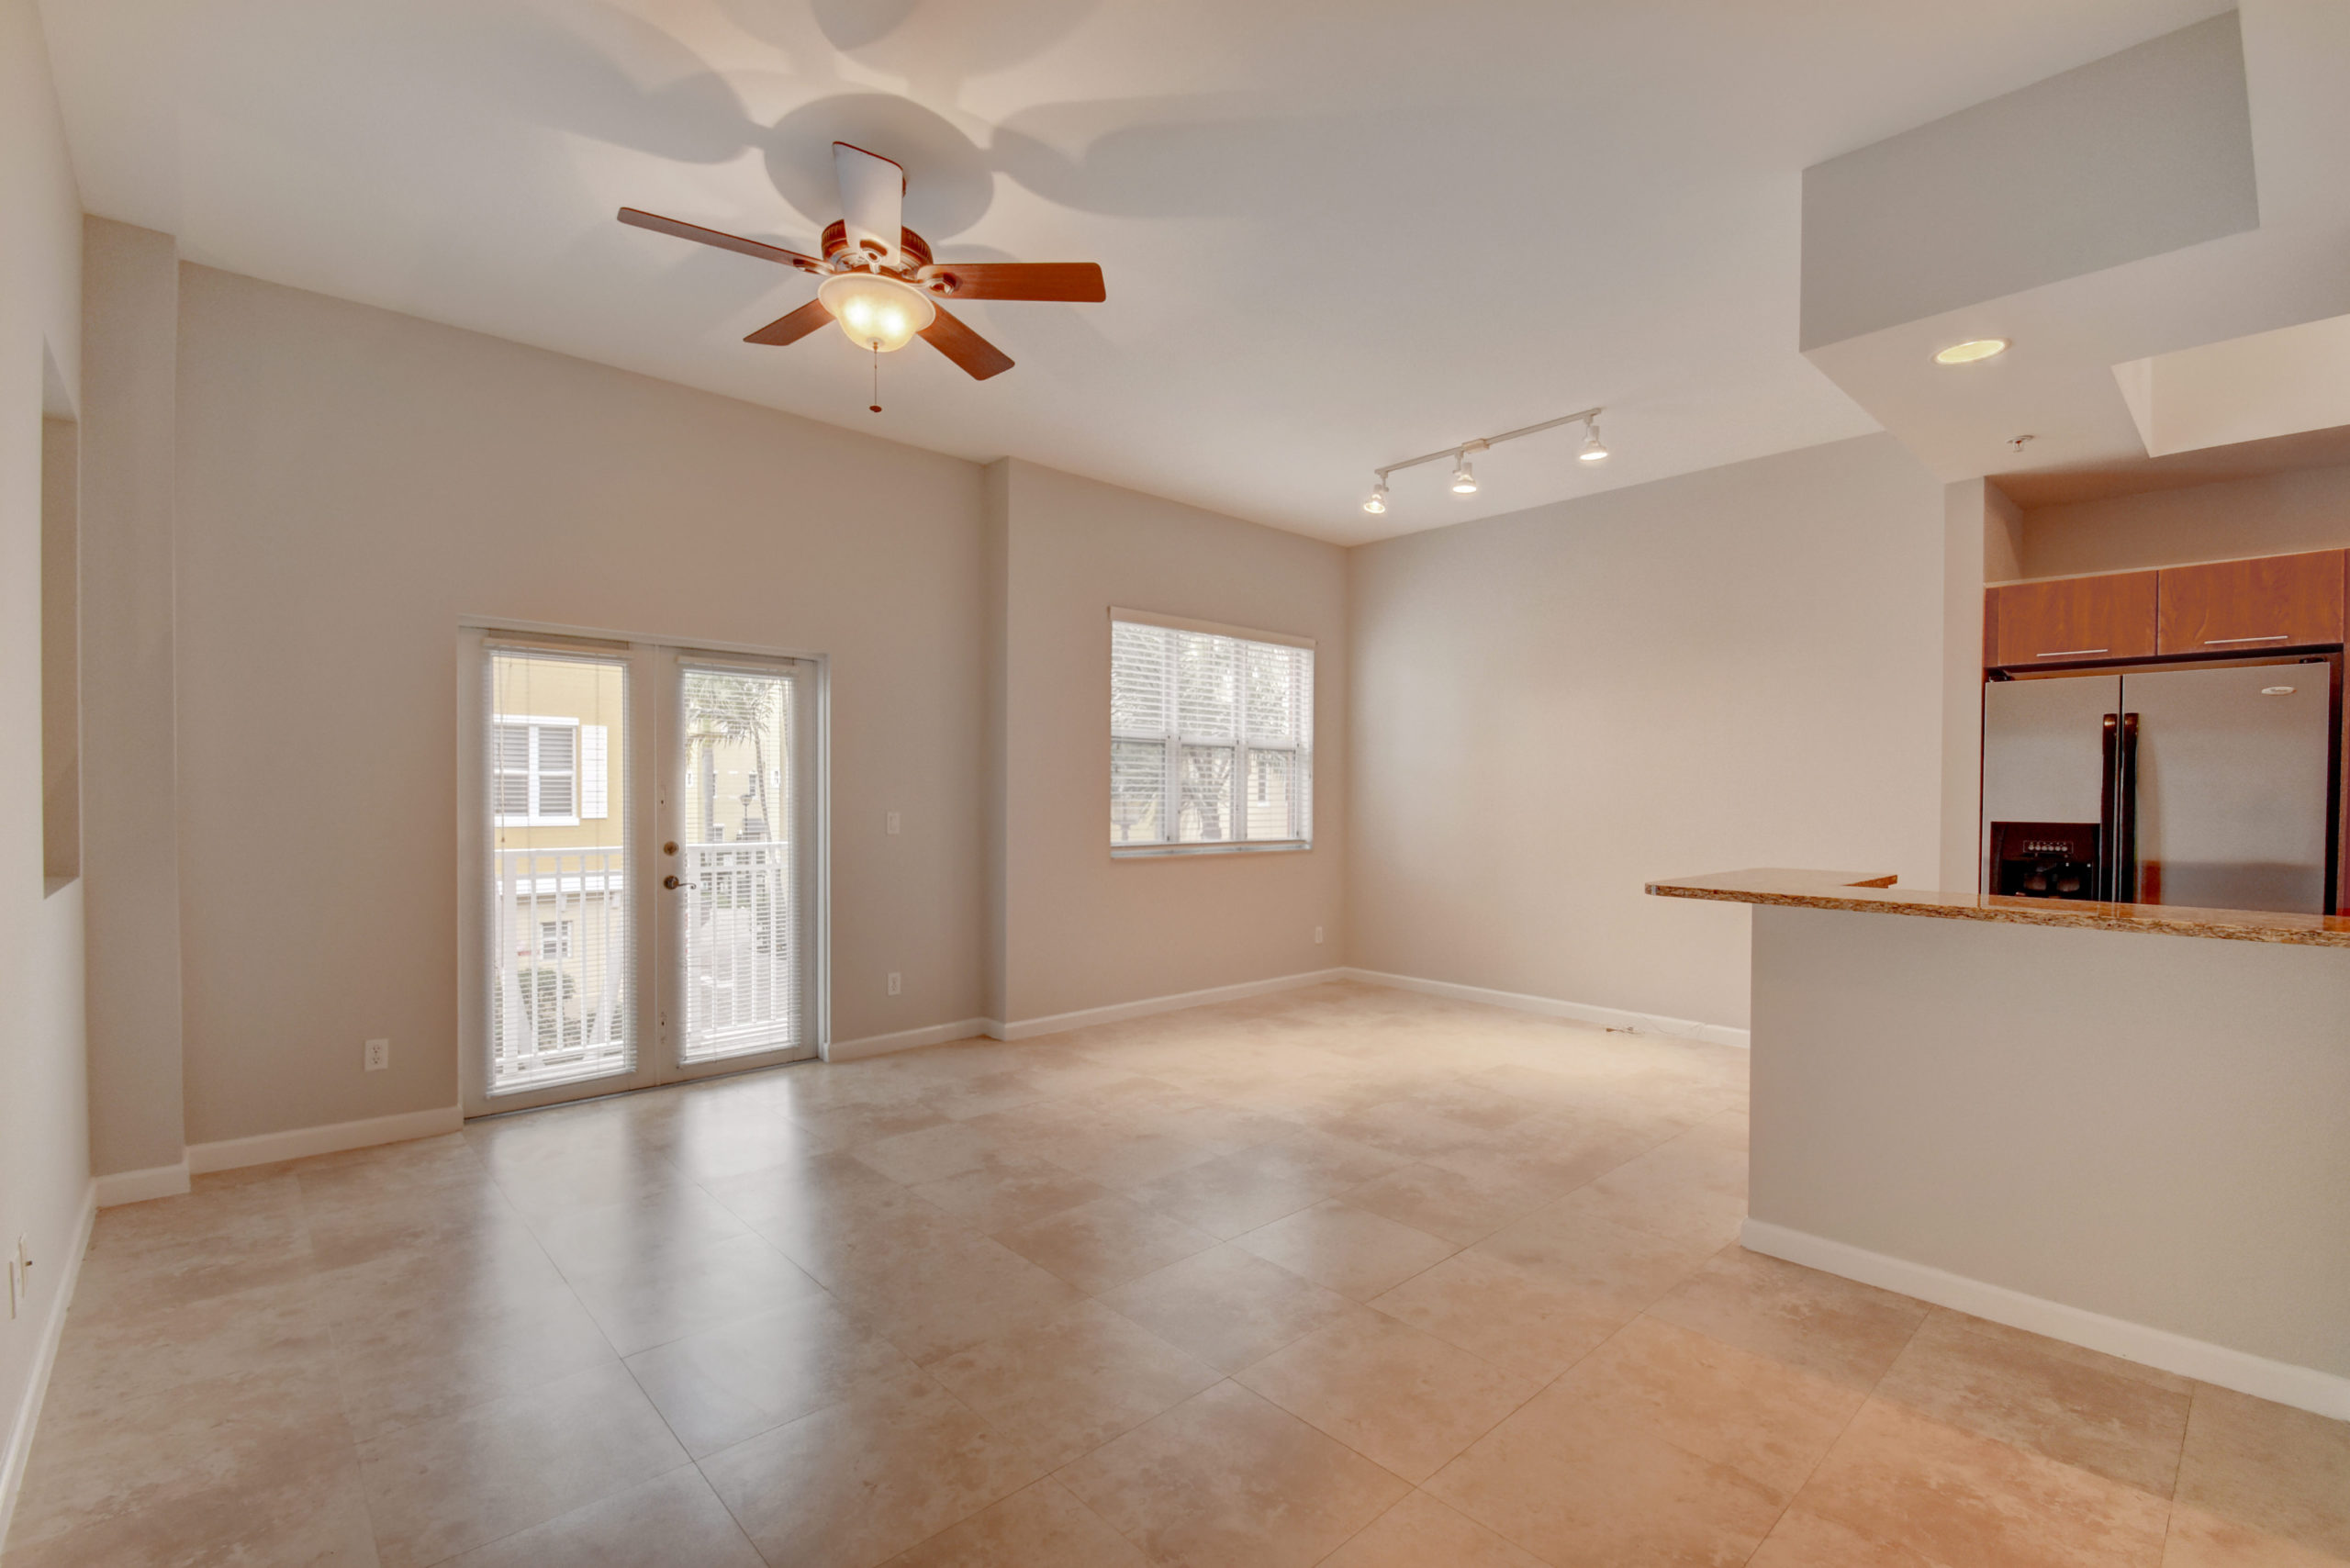 Virtual Staging - Virtual Staging Solutions